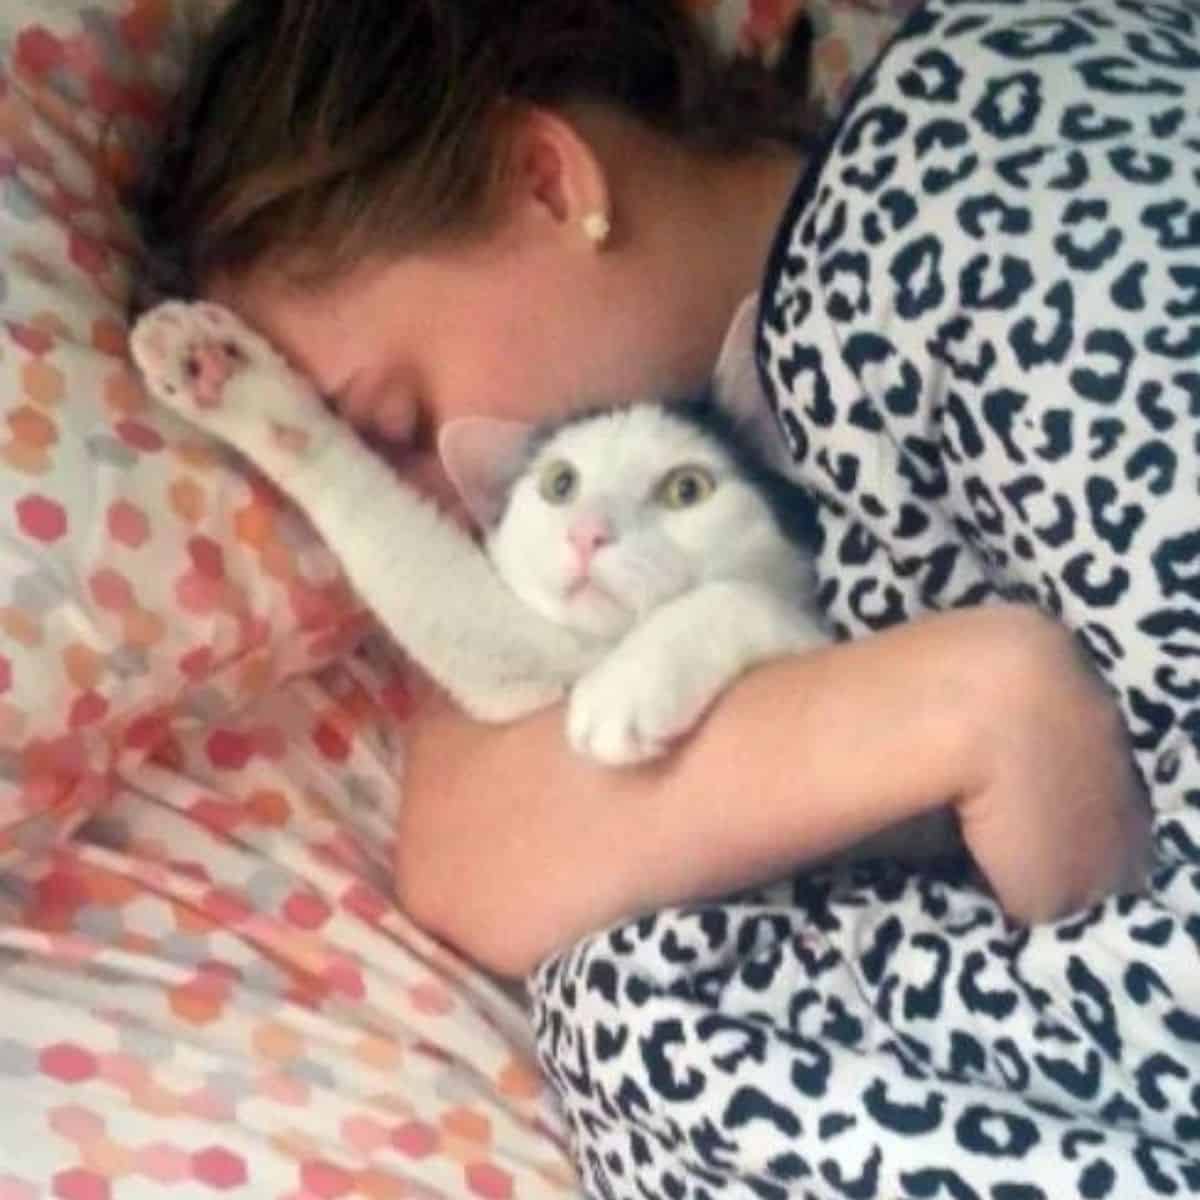 the woman hugged the cat while she was sleeping